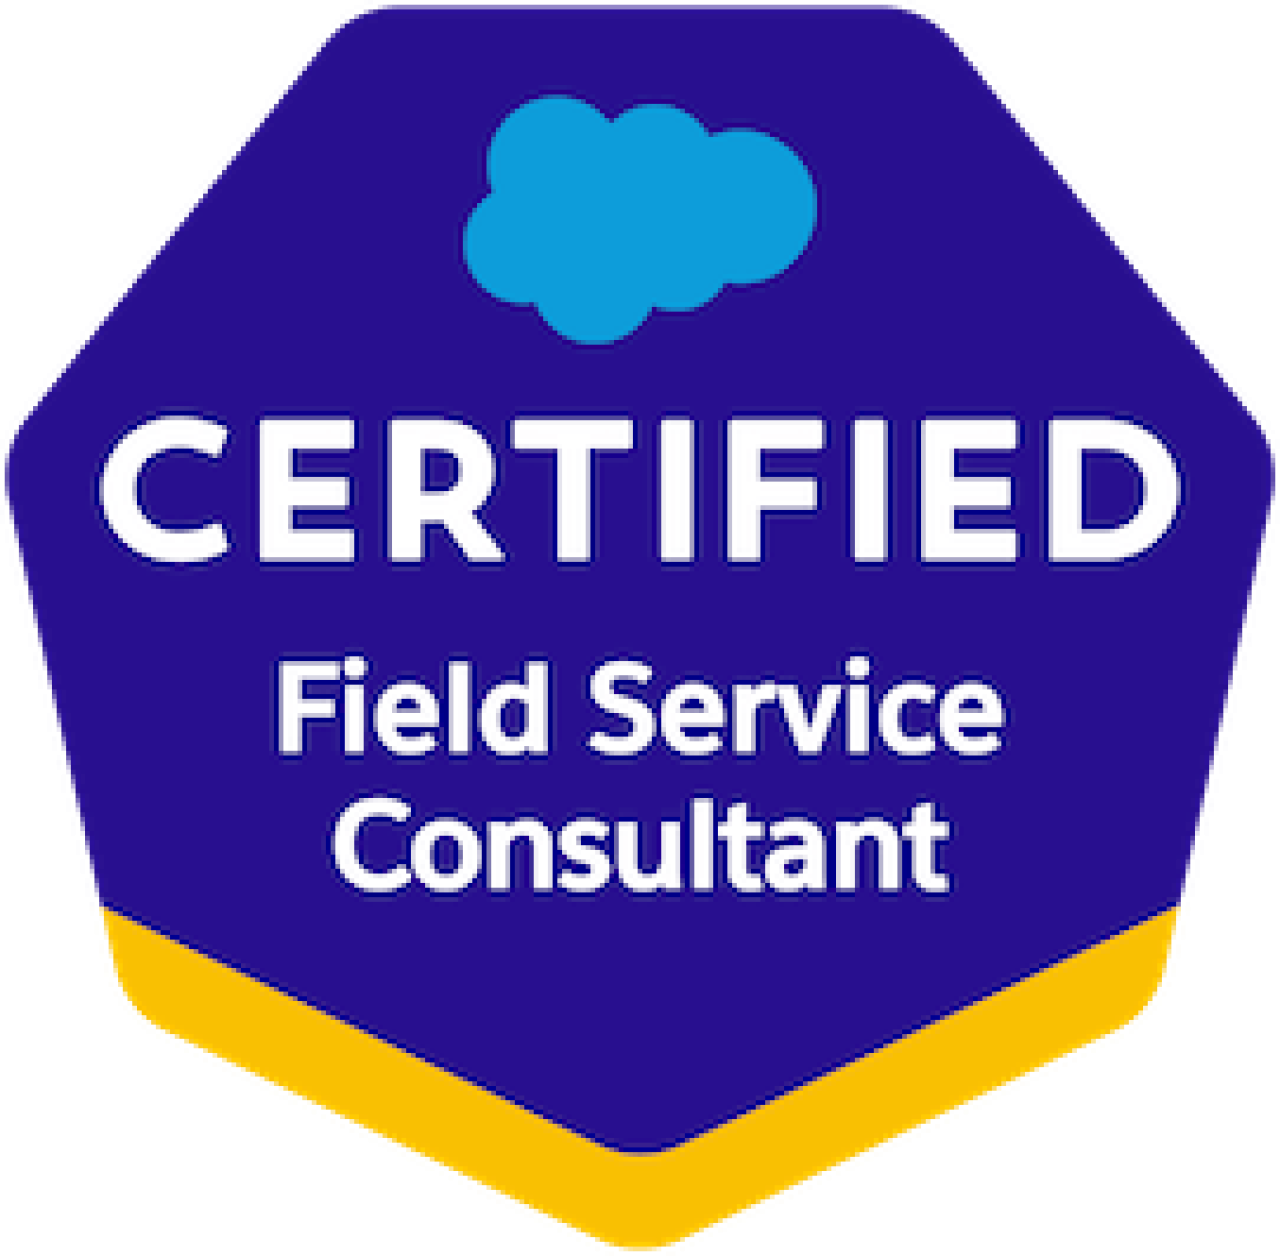 Salesforce Certified Field Service Consultant.